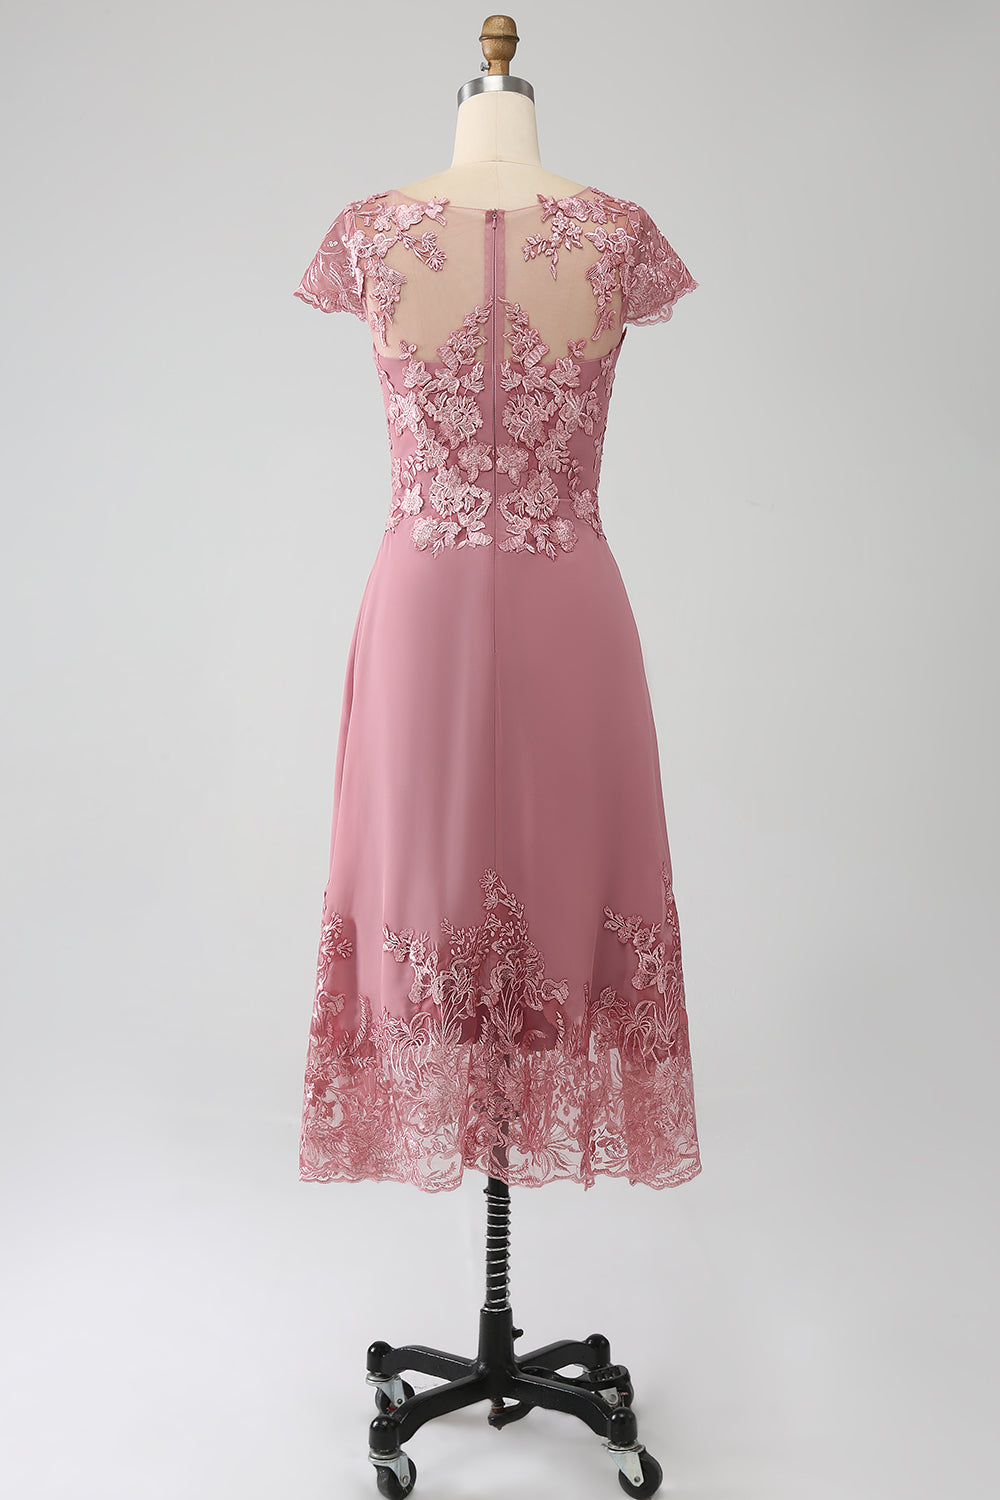 Dusty Rose A-Line Tea-Length Mother of the Bride Dress With Sequins